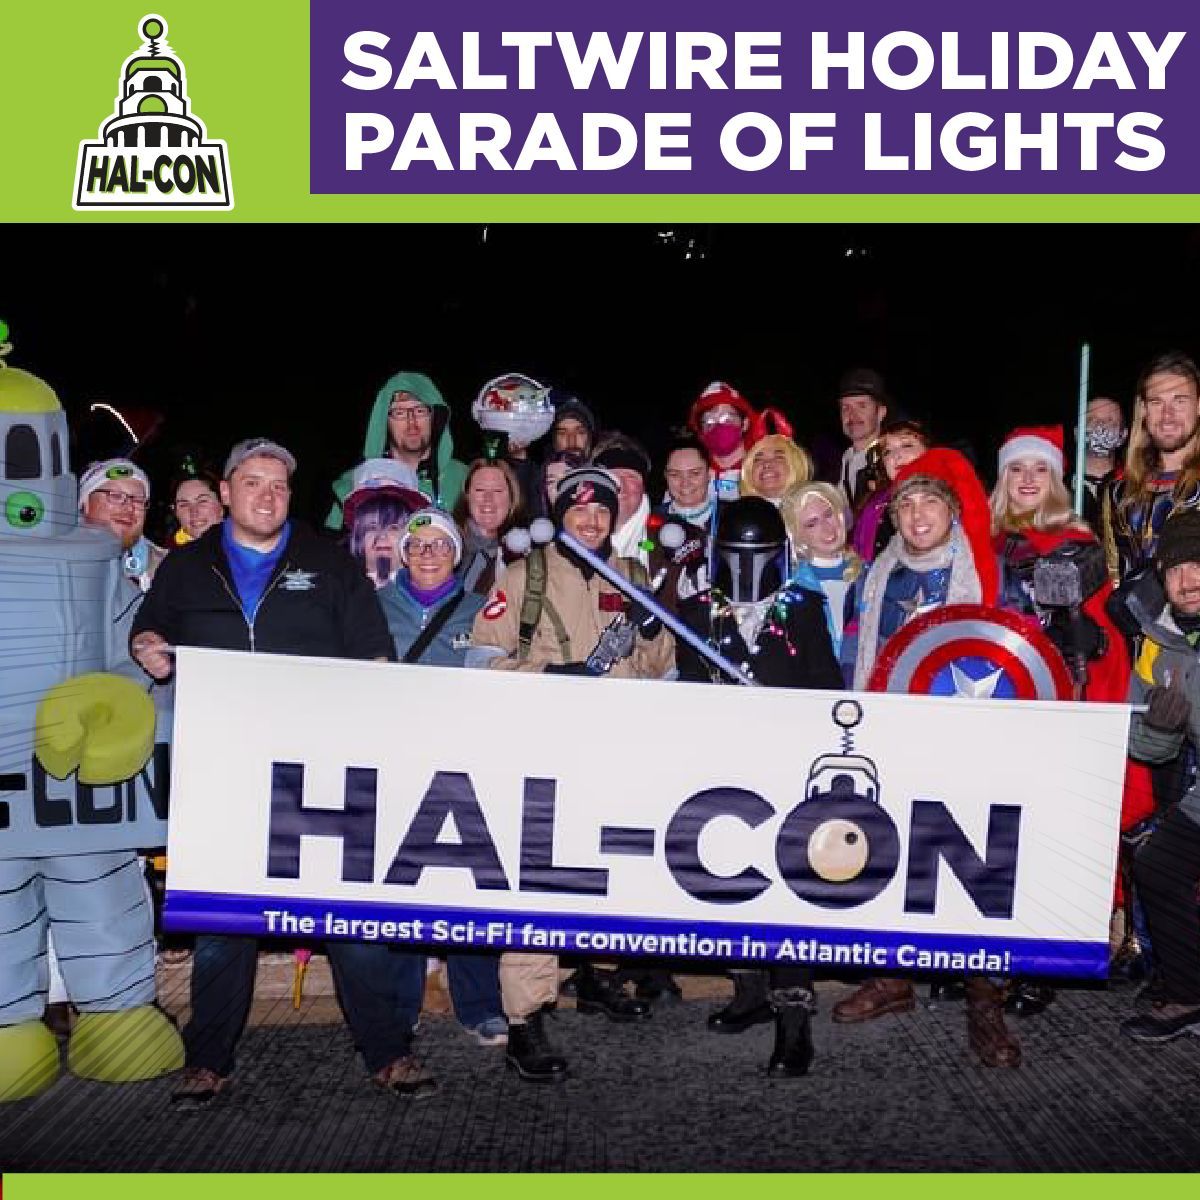 Get ready to rock the SaltWire Holiday Parade of Lights on Nov 18th with Hal-Con! Calling all fellow adventurers to join our walking entry. 🚀 Dress up, bring the magic, and let's make this the most epic parade yet. #HalCon2023 #JoinTheFun